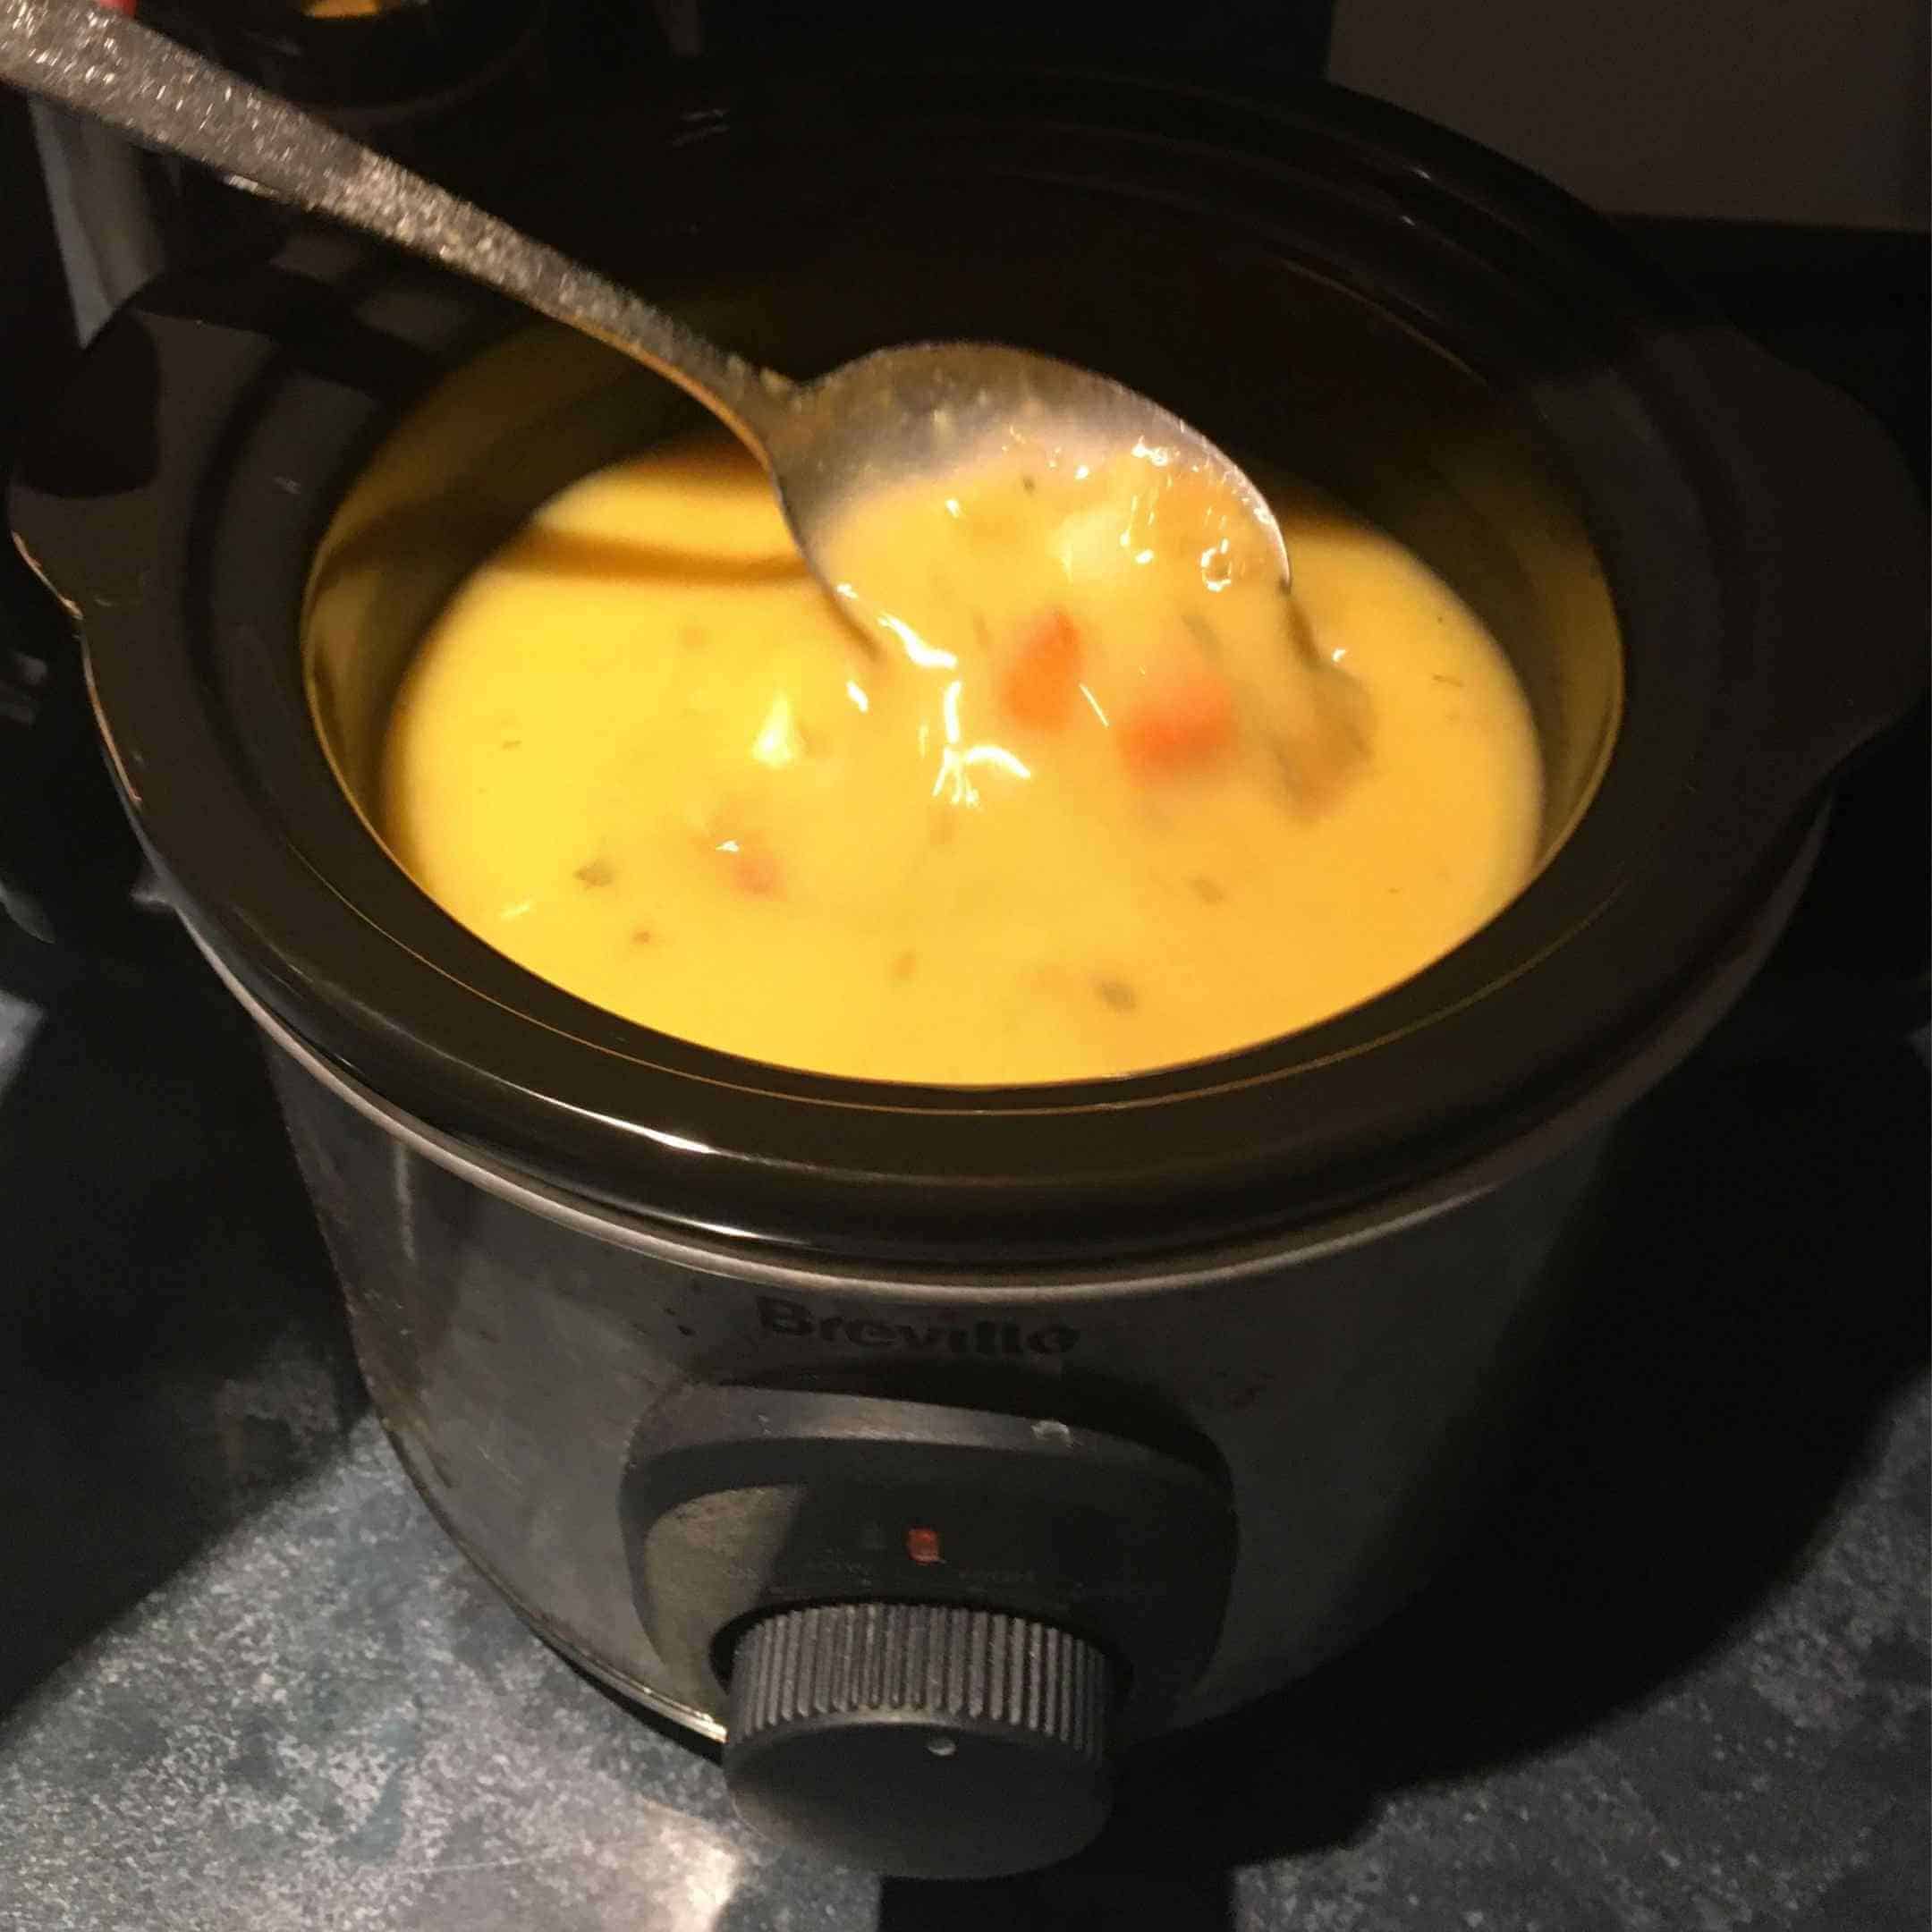 heating canned soup in the slow cooker